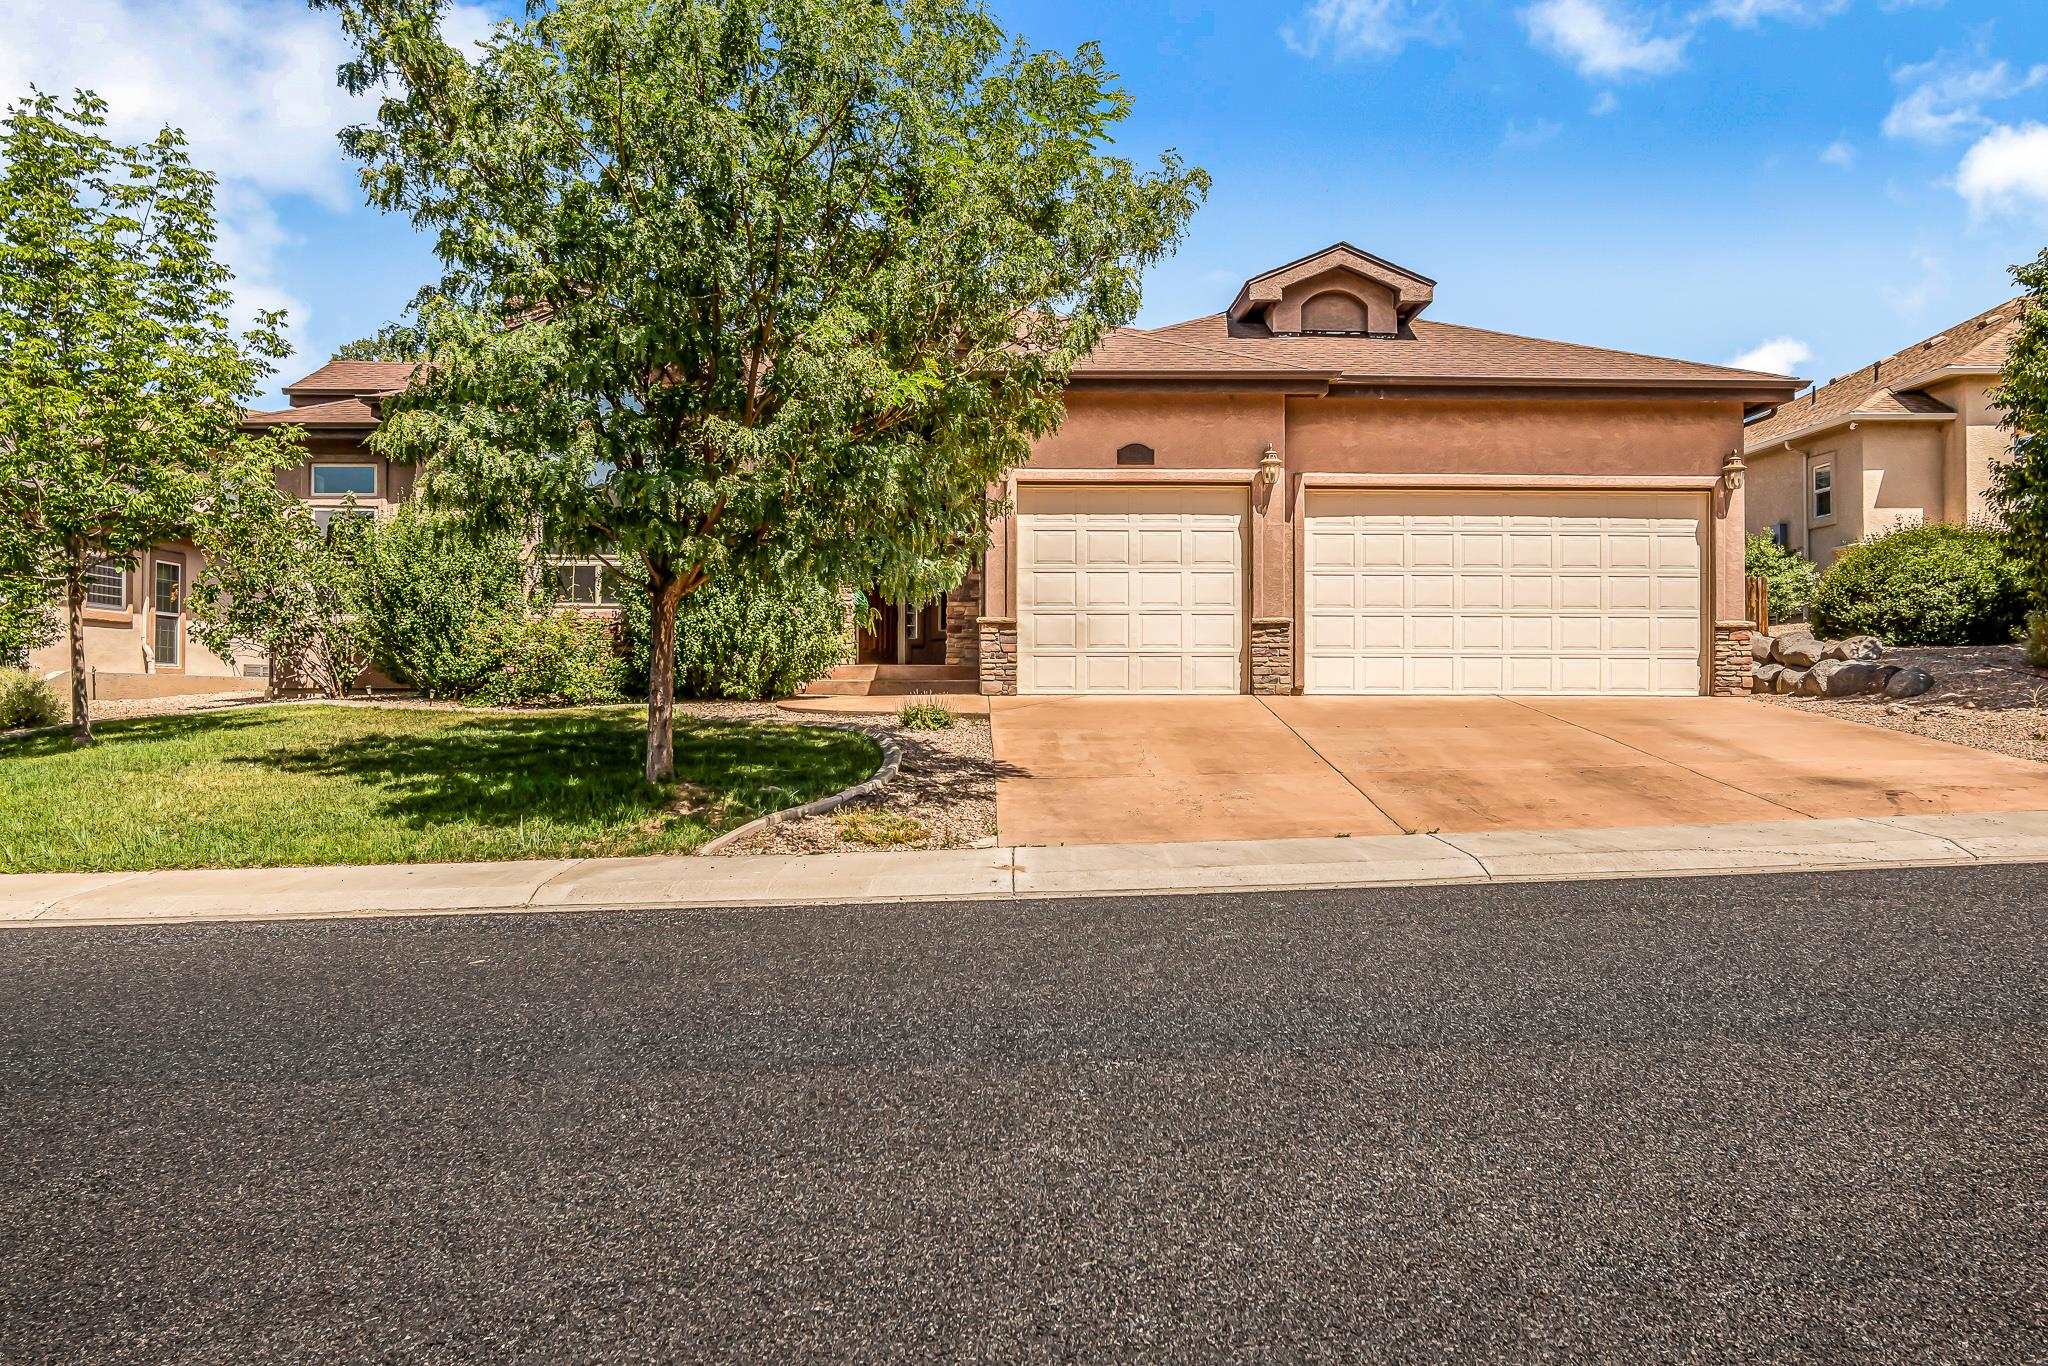 This traditional single level home is located in the esteemed Renaissance subdivision. much larger than the pictures appear, look at the 3d Tour or schedule your showing today.  Only 2 miles from the Tiara Rado golf course and 3 miles from the Colorado National Monument, the location cannot be beat. The abundant outdoor amenities close by are within minutes in every direction. When you enter through the covered front, you are greeted by the grand entryway with custom tile work and arches leading you to the rest of the 3,069 square feet this huge home boasts. The master suite is tucked in its own corner of the home for true privacy in this luxury space and a separate exit to the back patio that was created to entertain! Huge walk in closet, extra storage, 5-piece bath including a large jacuzzi tub and built-in vanity, tops off this full service suite. One of the additional guest bedrooms is set up with a private 4-piece bathroom and a dual facing fireplace shared with one of the 2 family rooms. The second family room has a gas fireplace as well! There is an additional bonus/flex space that can be used as an office, formal dining or whatever you need. Every single bedroom in this home has its own attached bathroom and the back bedroom has a private exit to the patio. The kitchen has a Granite bar top, 5 burner gas range oven and dedicated dining area. The large laundry room makes a truly functional space and leads you into the huge 3 car garage! Plumbed and ready to add a central vac system, built in wall mounted water feature and gas plumbed to the back patio for your outdoor cooking, are only a few of the additional features that this Renaissance home has to offer. Are you ready to settle into an exclusive neighborhood and enjoy the lifestyle it brings? Schedule your showing for this Redlands property today!